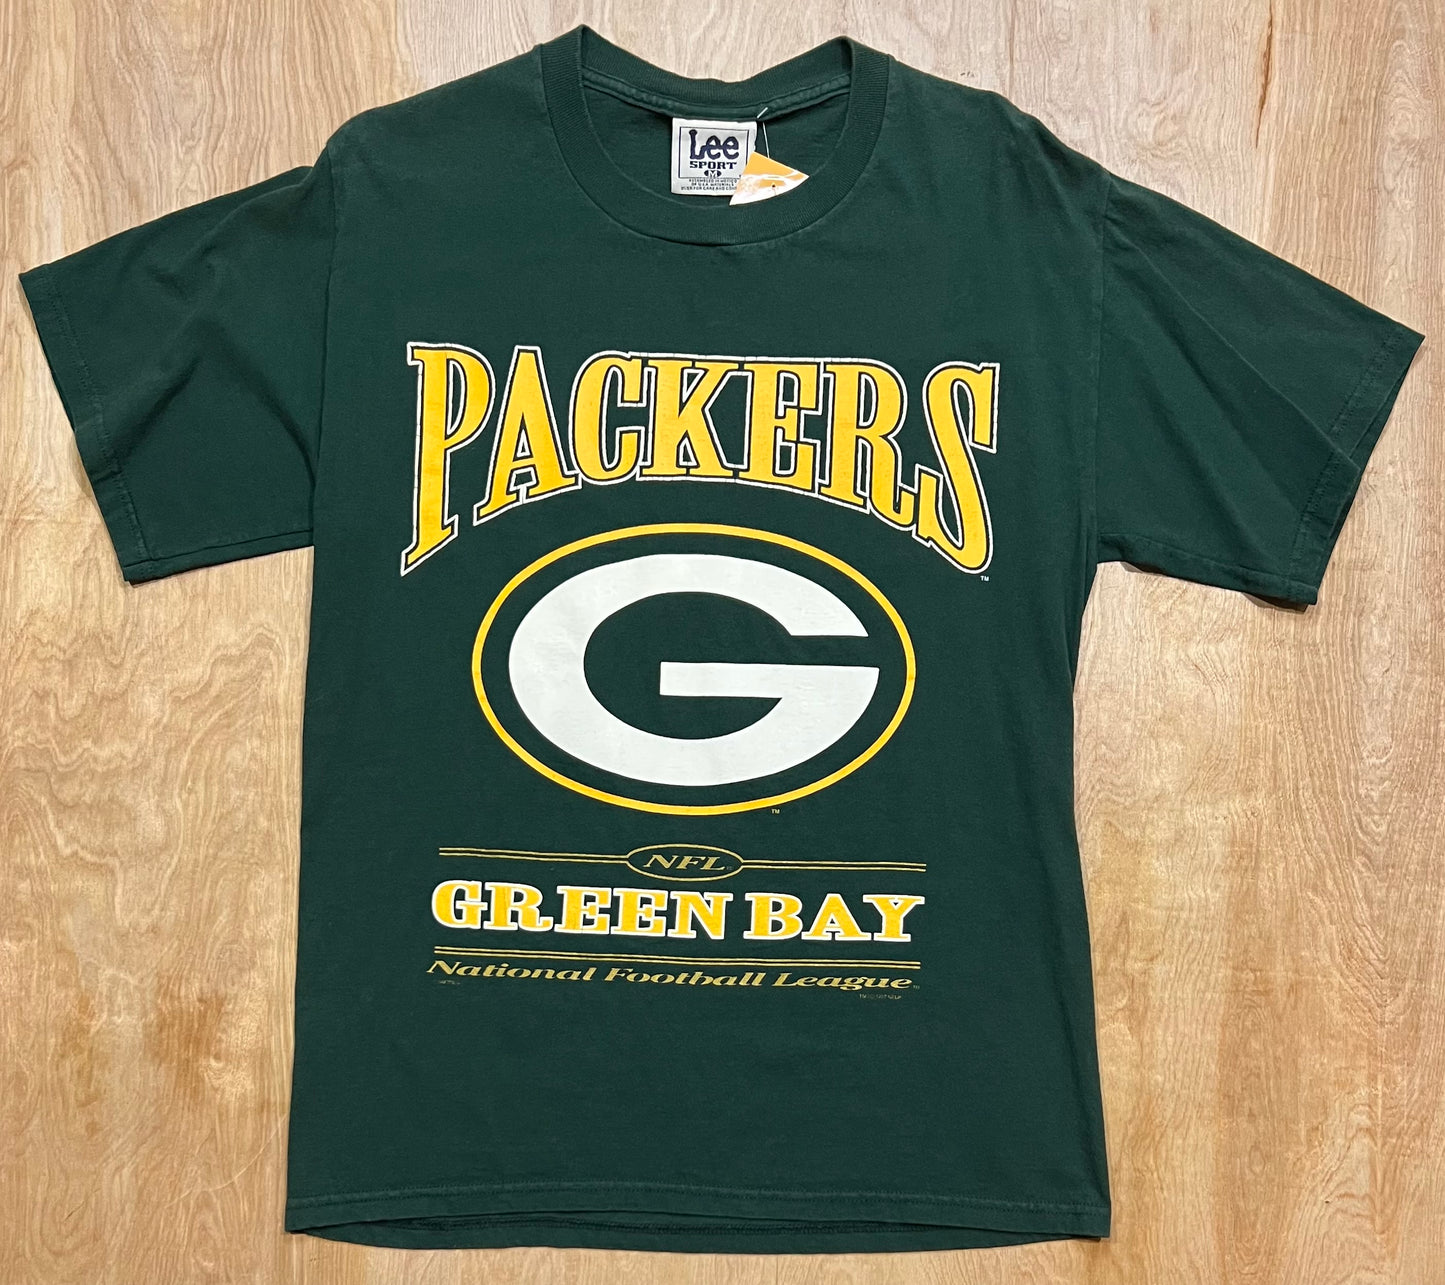 1997 Green Bay Packers Lee Sports T-Shirt